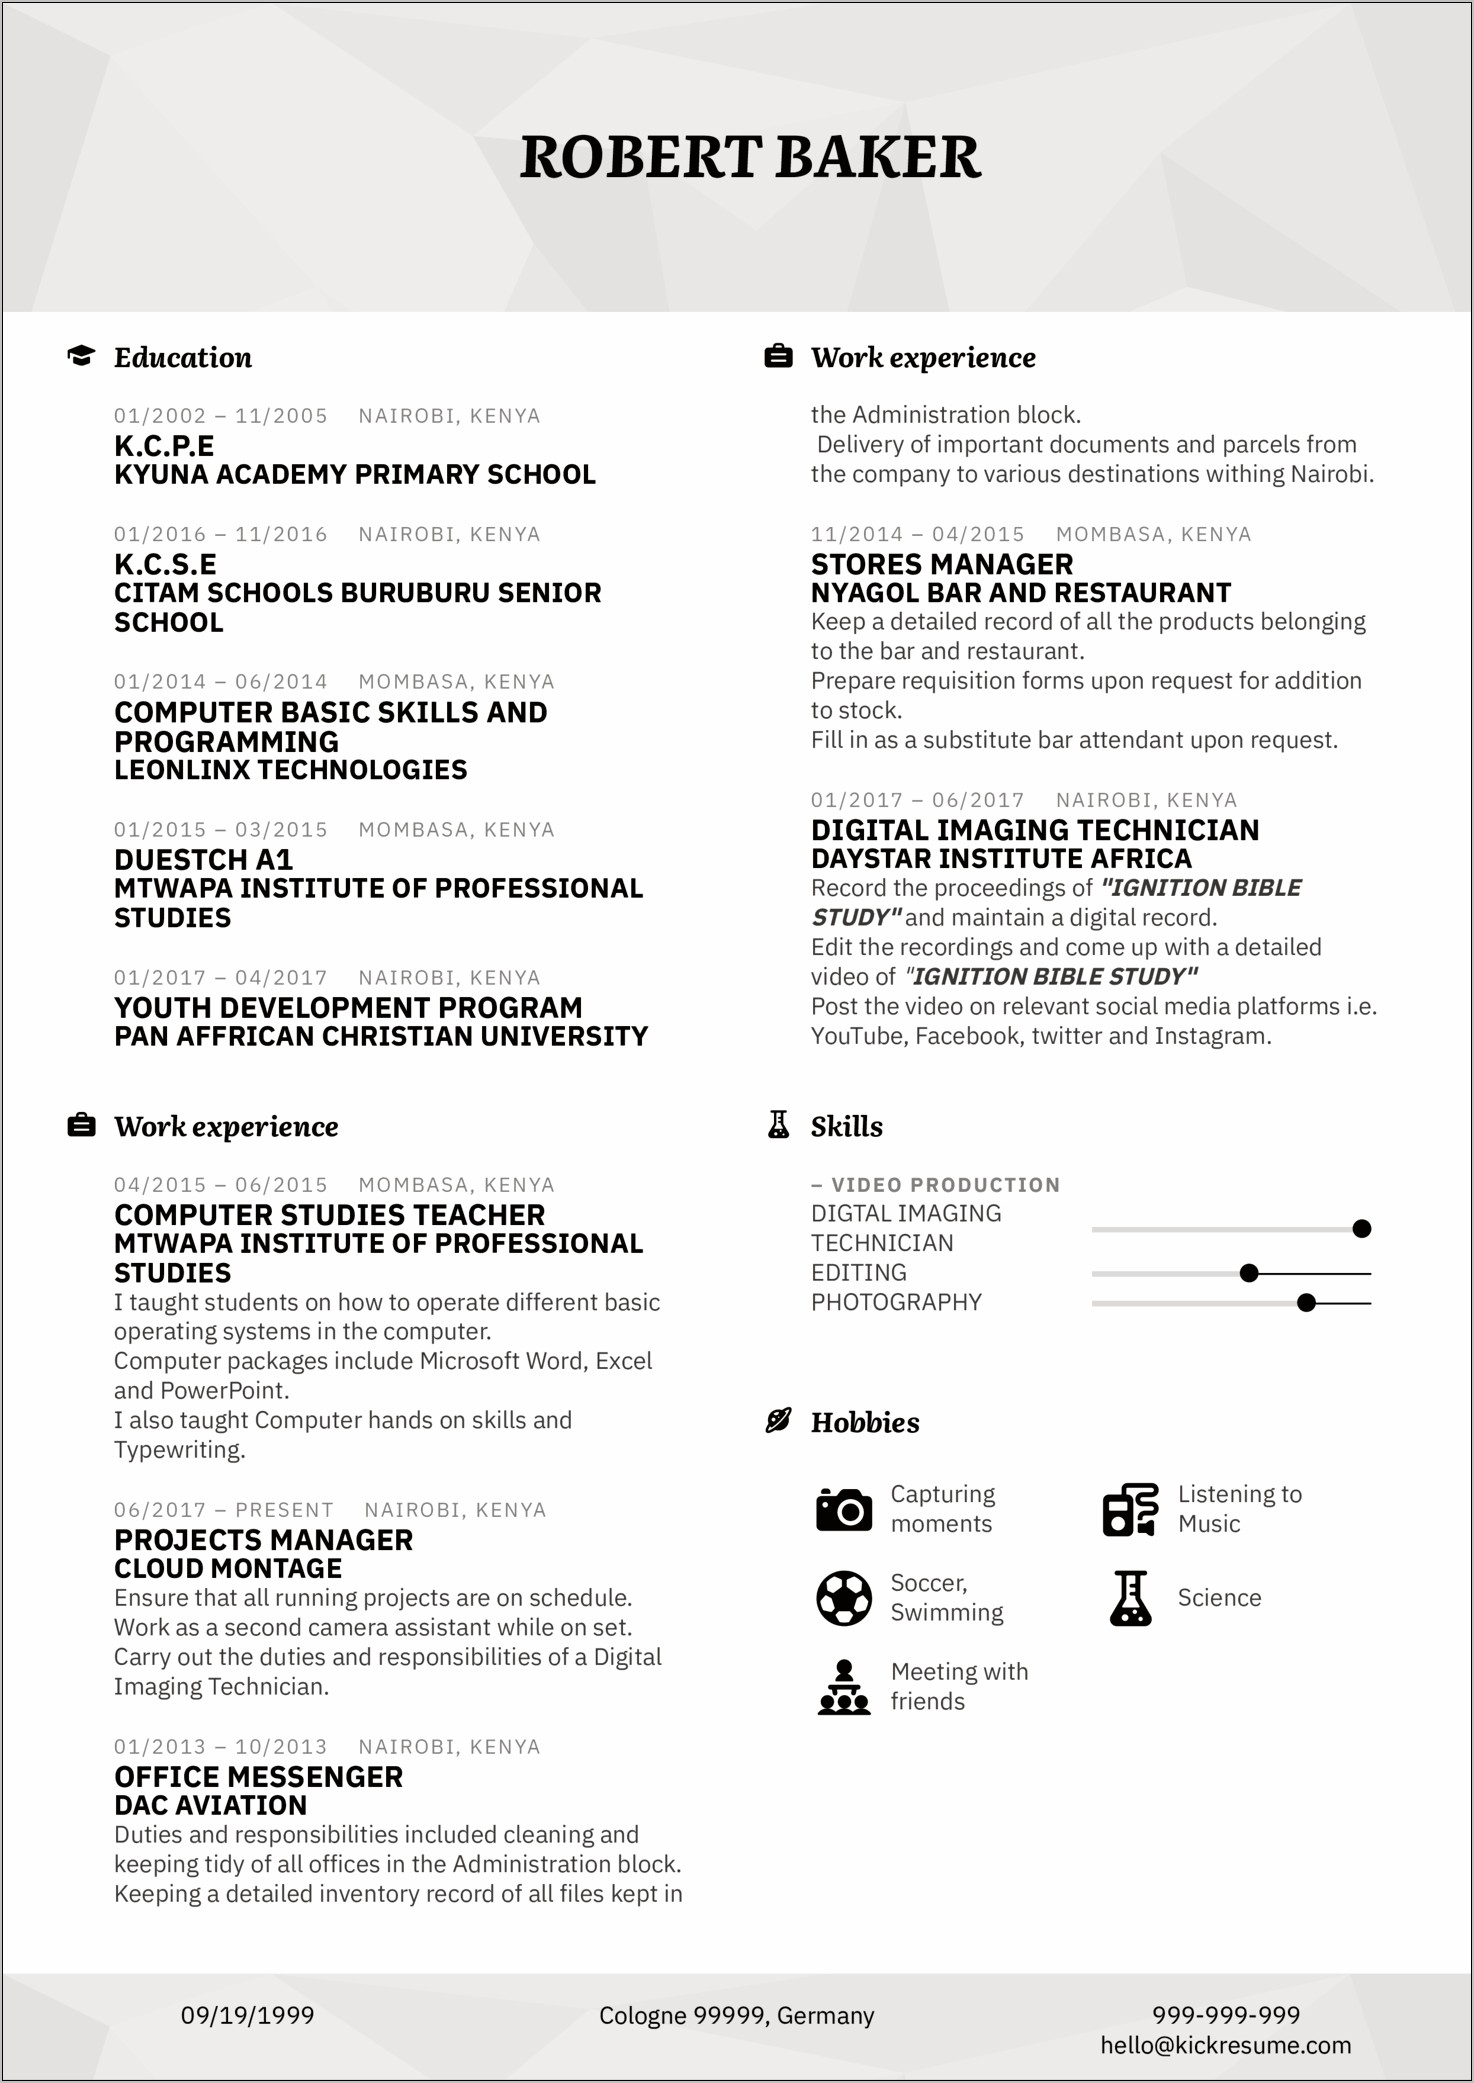 Service Industry Manager Resume Bullets